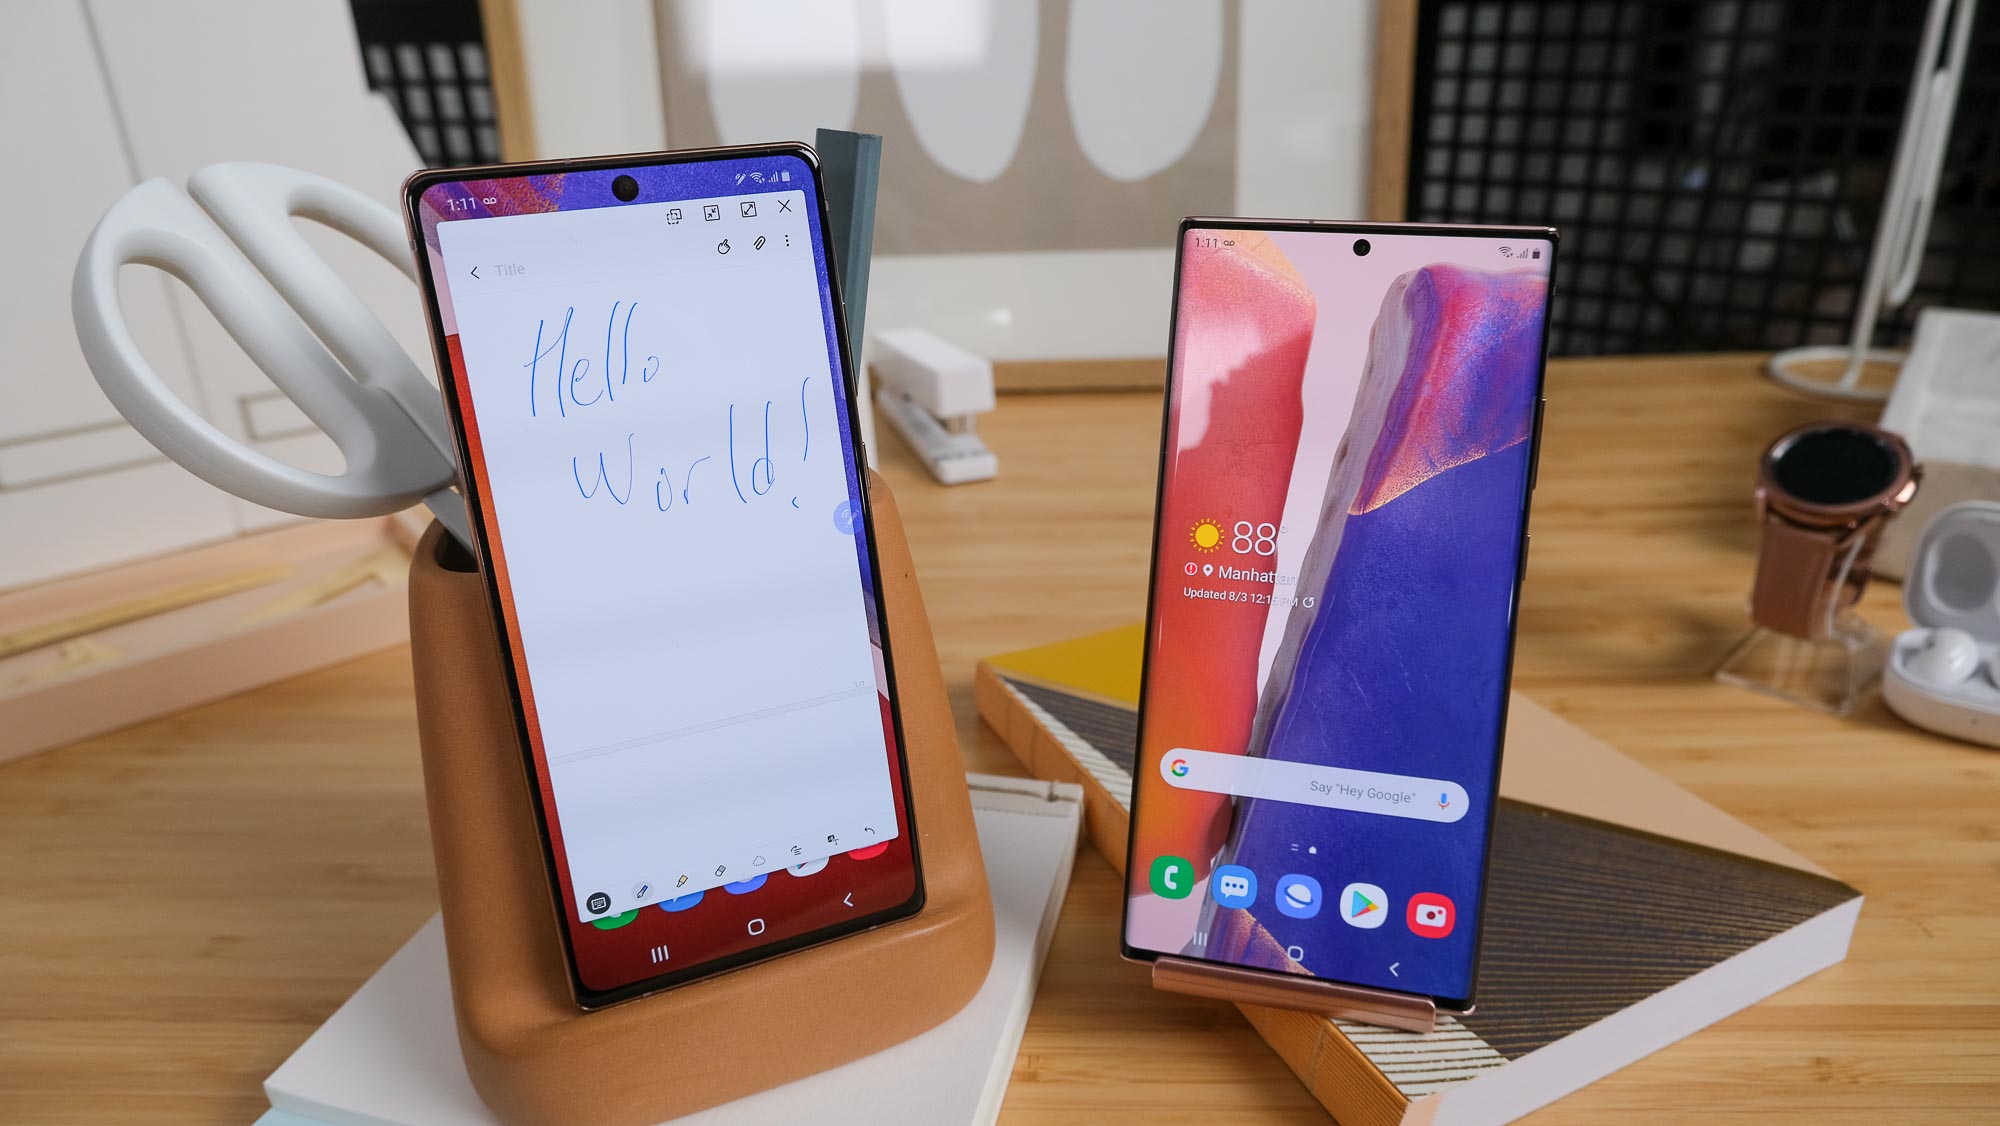 Samsung Galaxy Note 20 vs Galaxy Note 10: What's different